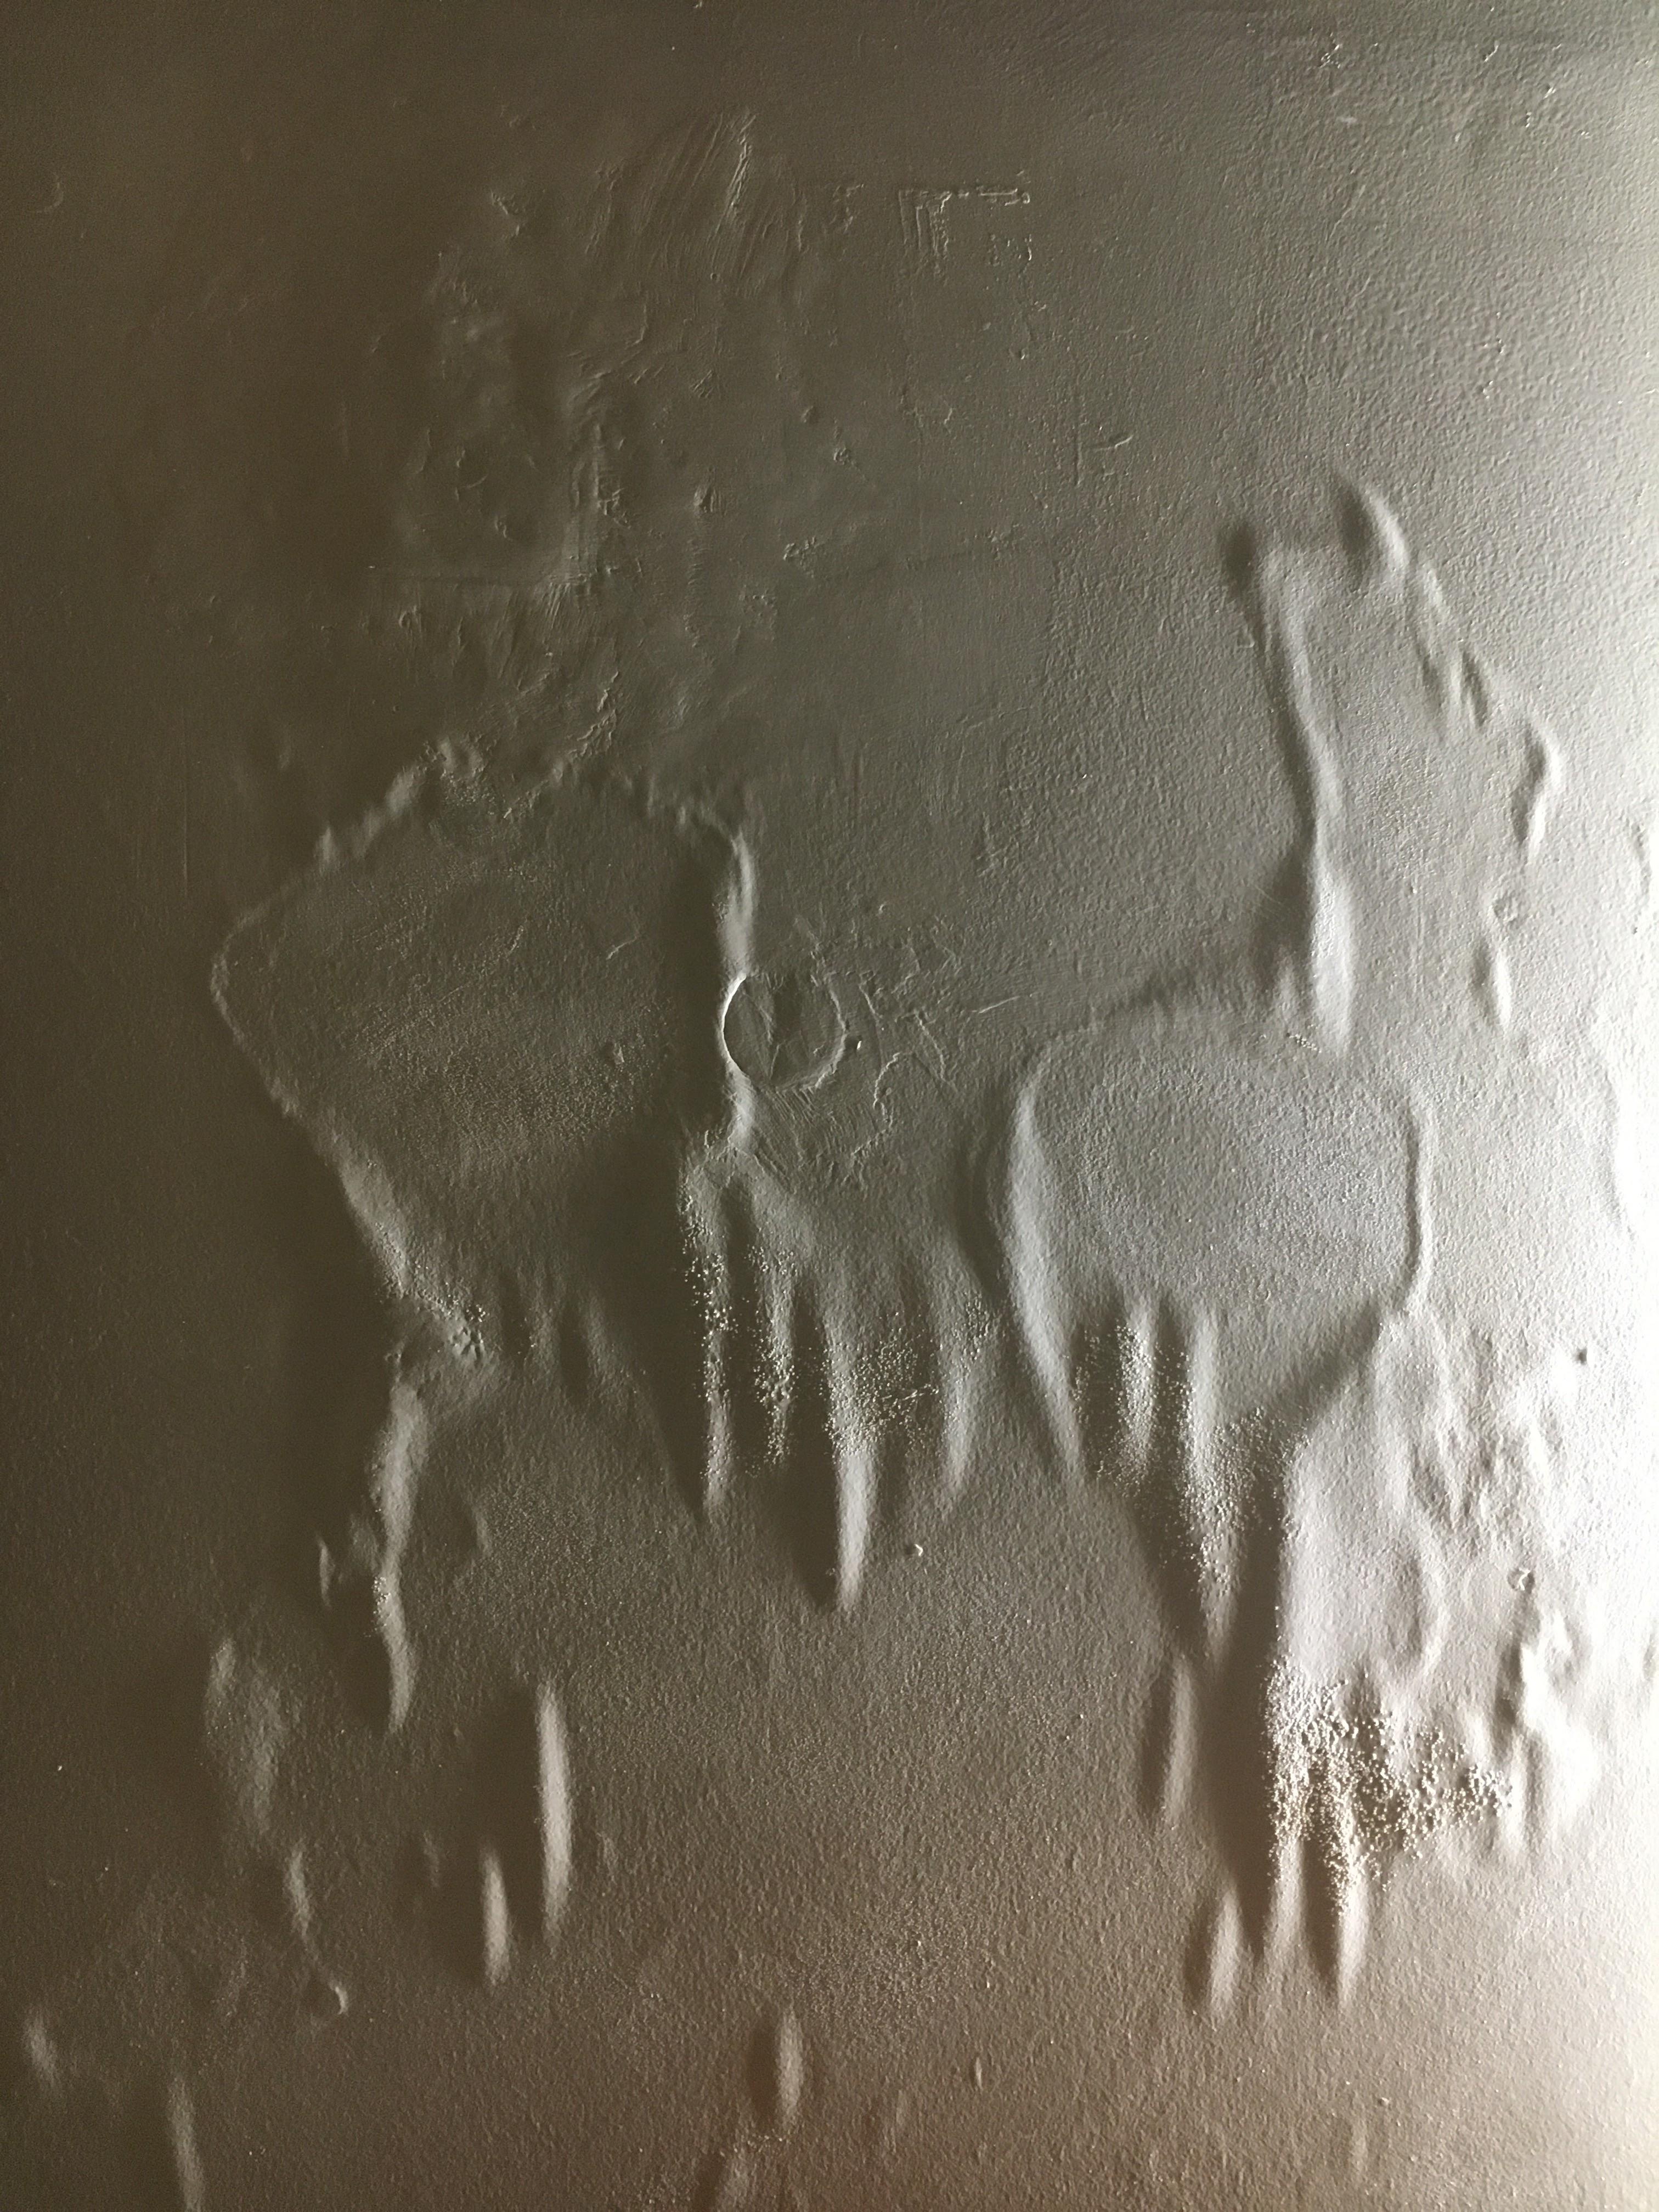 Mysterious drywall material? Paint bubbling/peeling. More pictures ...